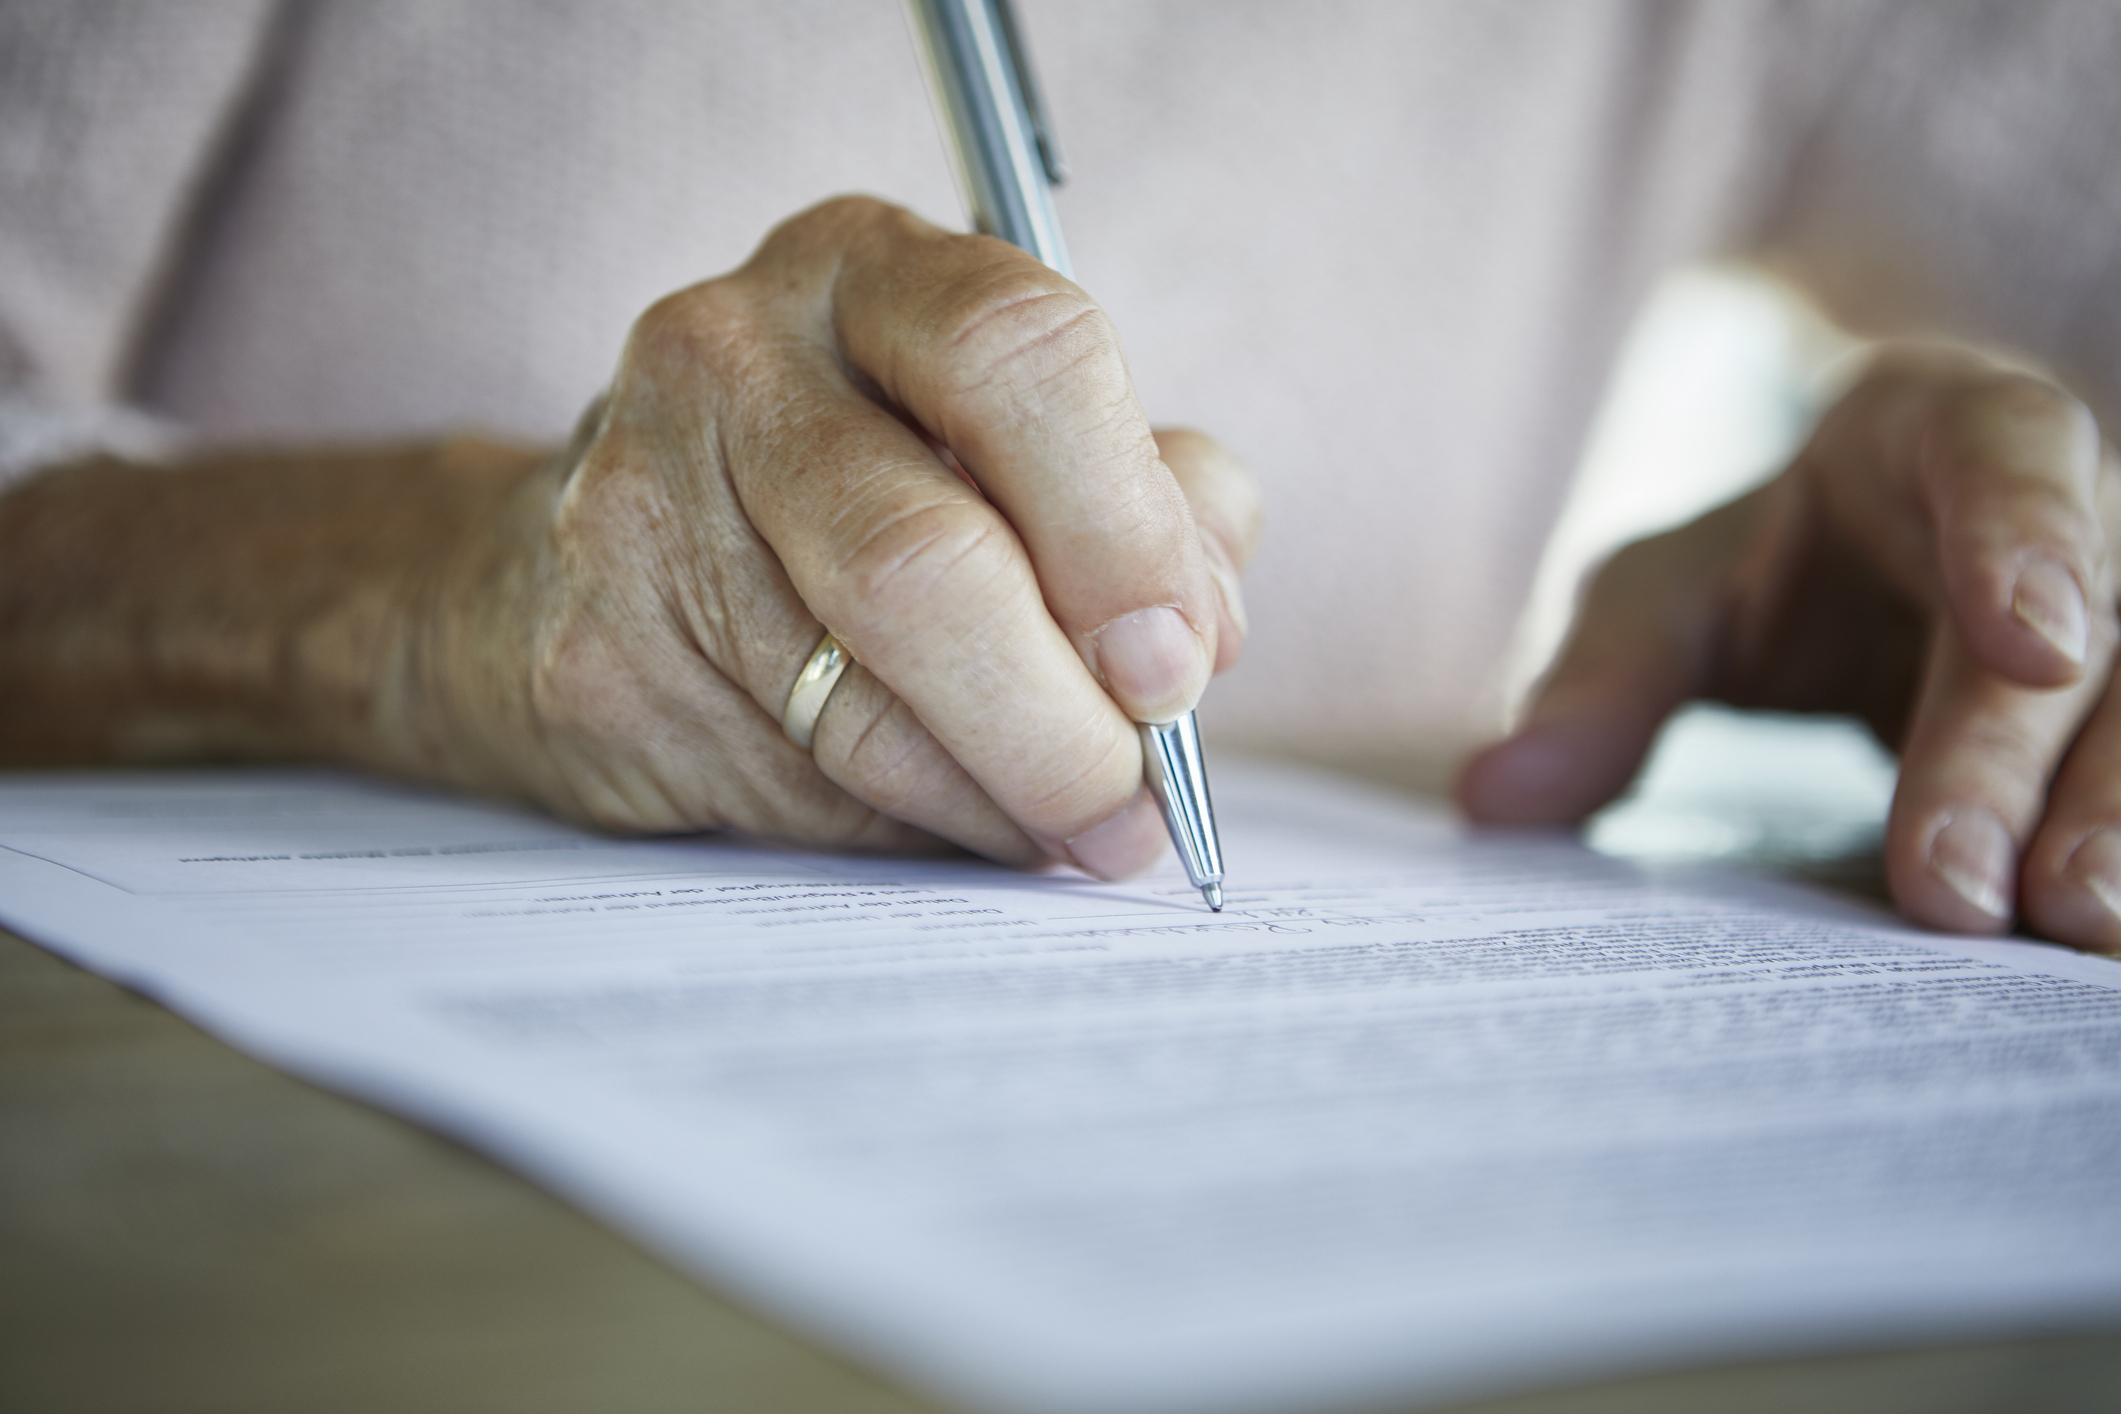 A close-up of an elderly person&#x27;s hand holding a pen while signing legal documents. The person&#x27;s hand displays a gold ring